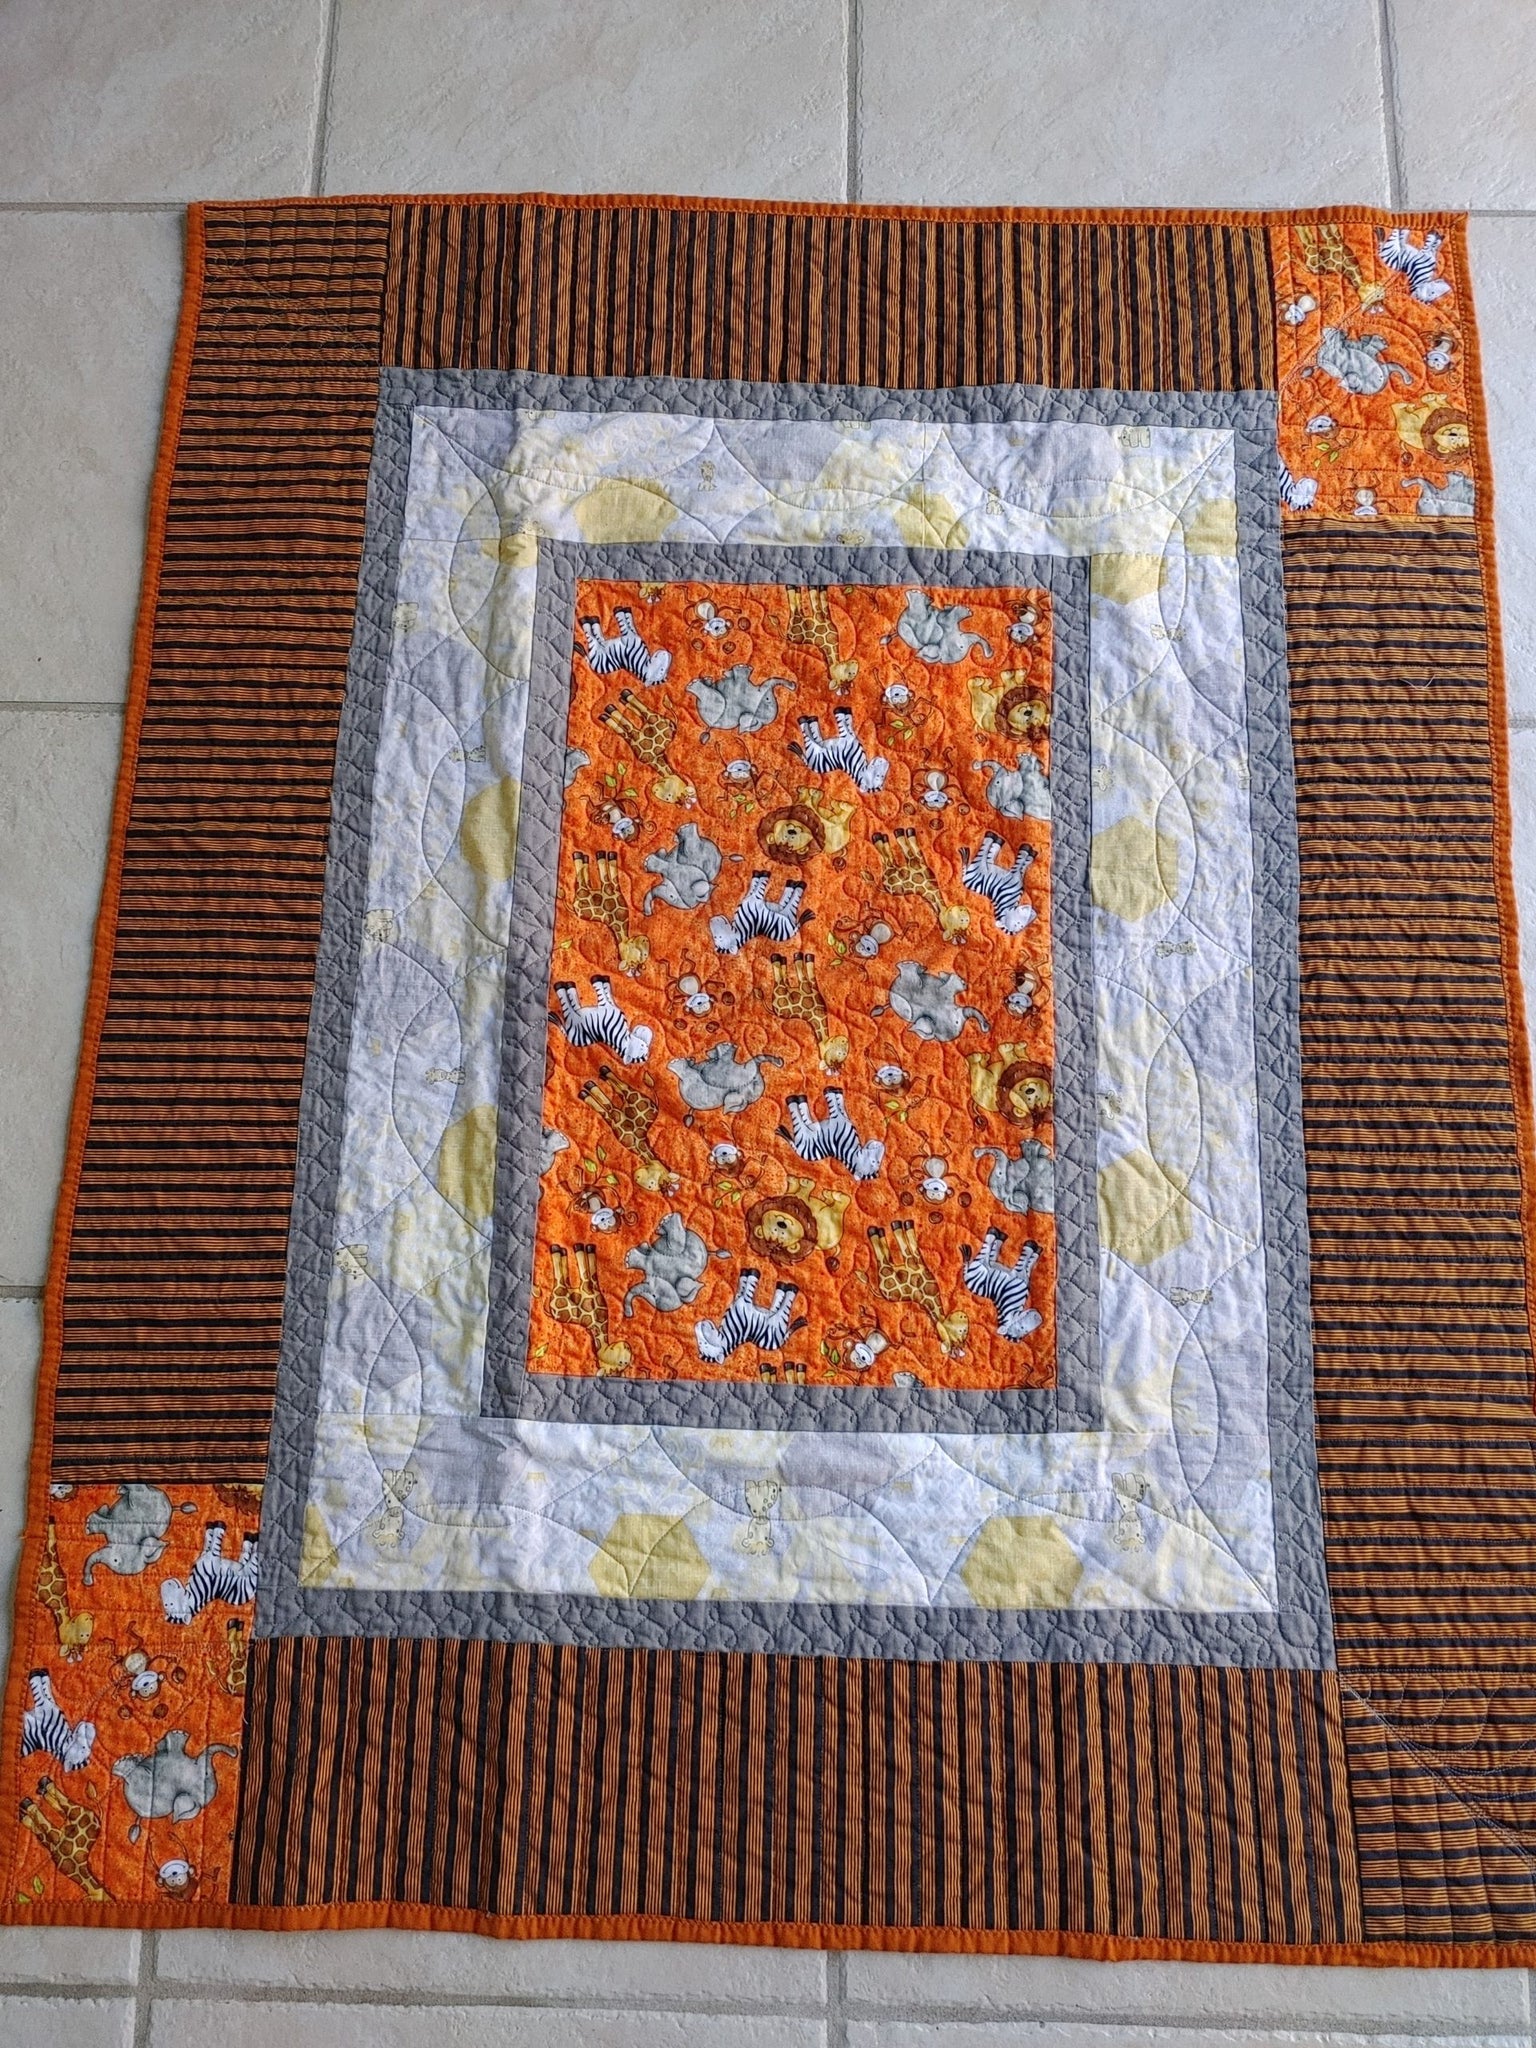 Community Quilts from Karin